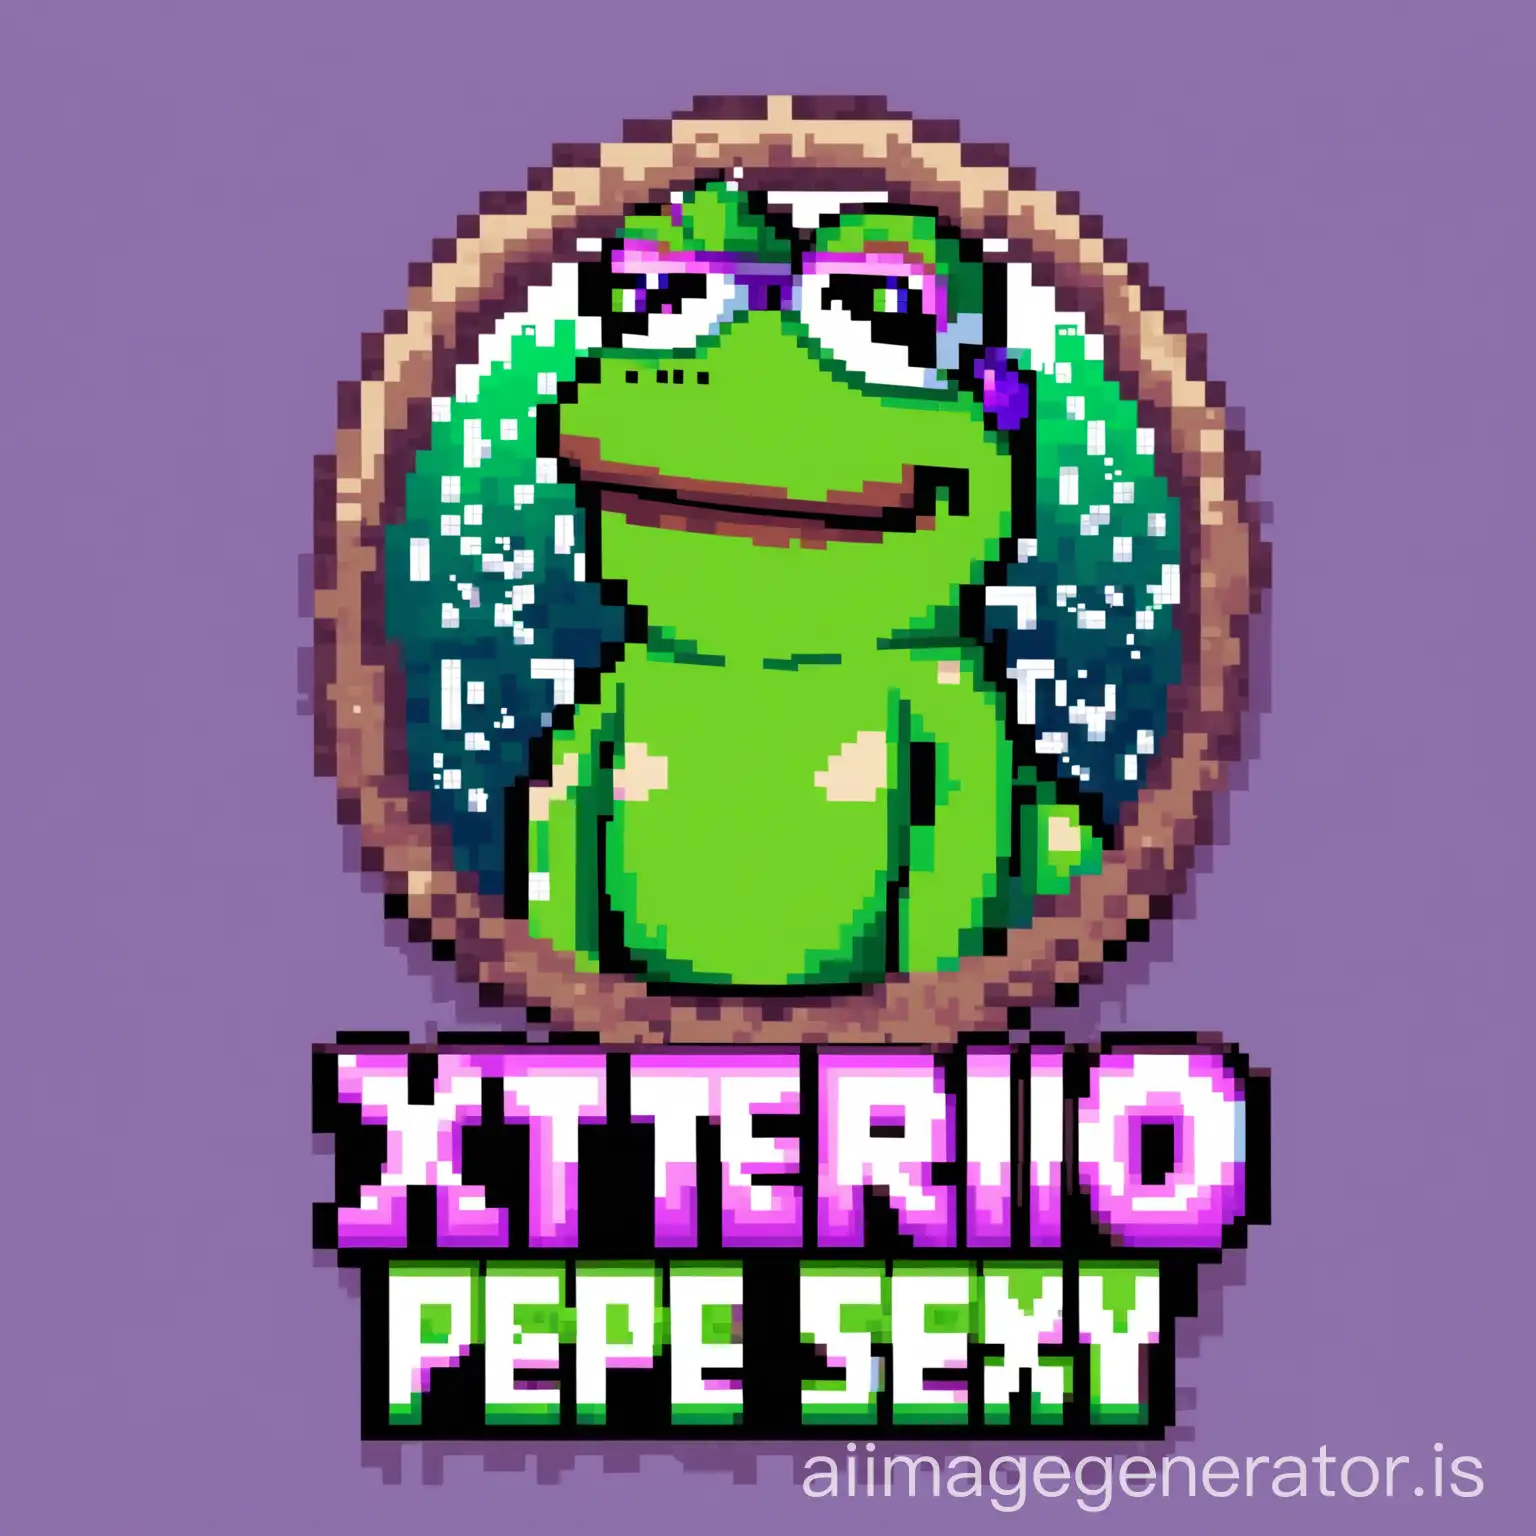 we have pixel sexy purple pepe with pixel in sea
we see" xterio" text in back ground
details are high quality